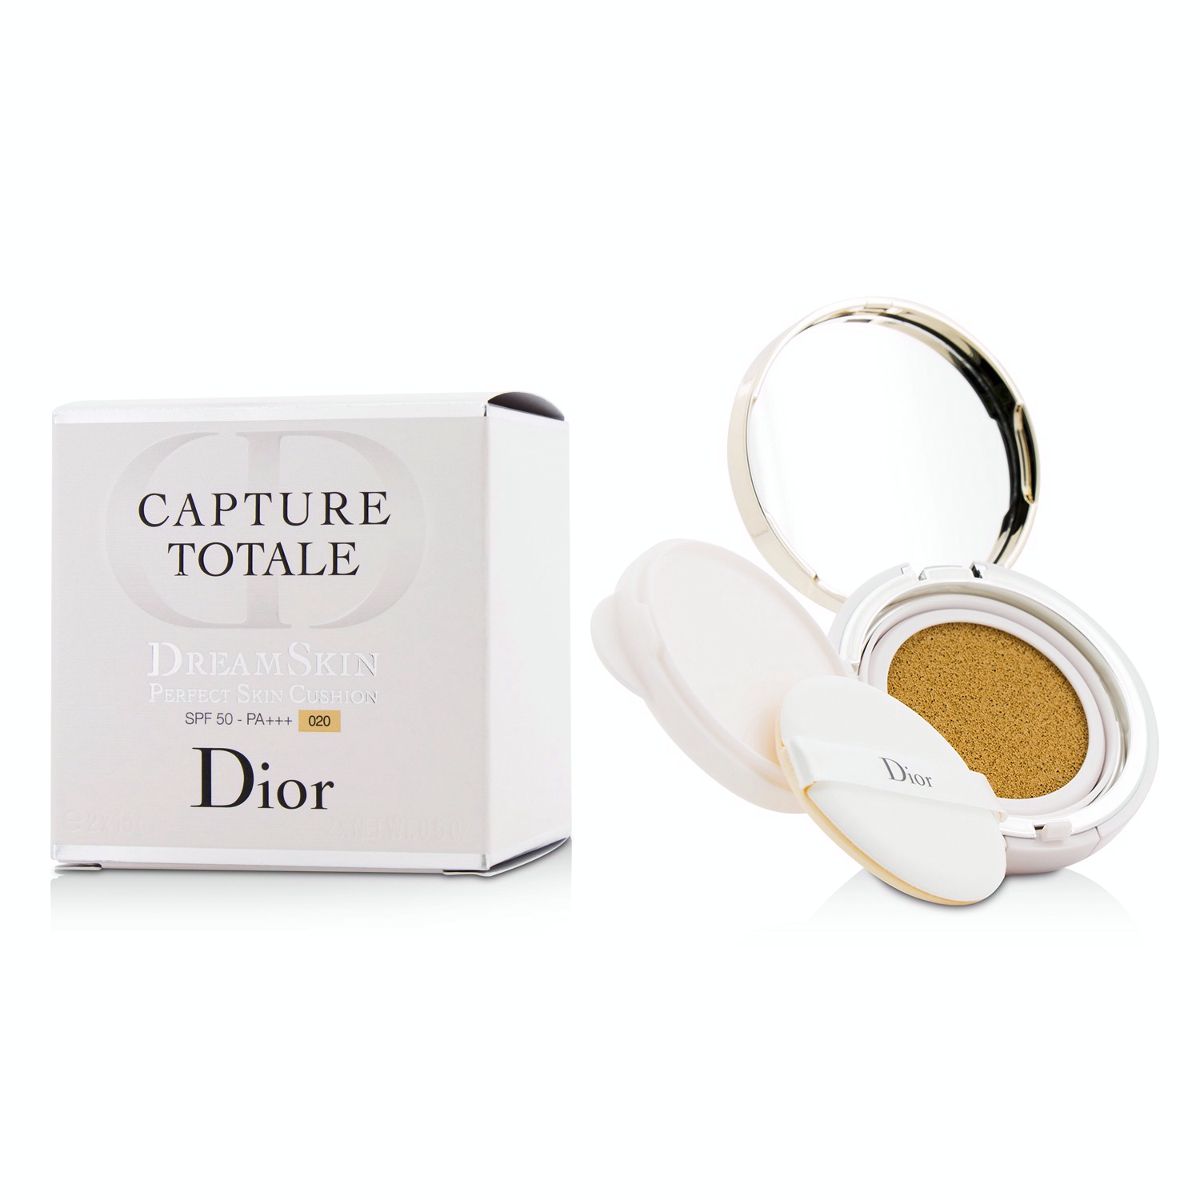 Capture Totale Dreamskin Perfect Skin Cushion SPF 50  With Extra Refill - # 020 Christian Dior Image